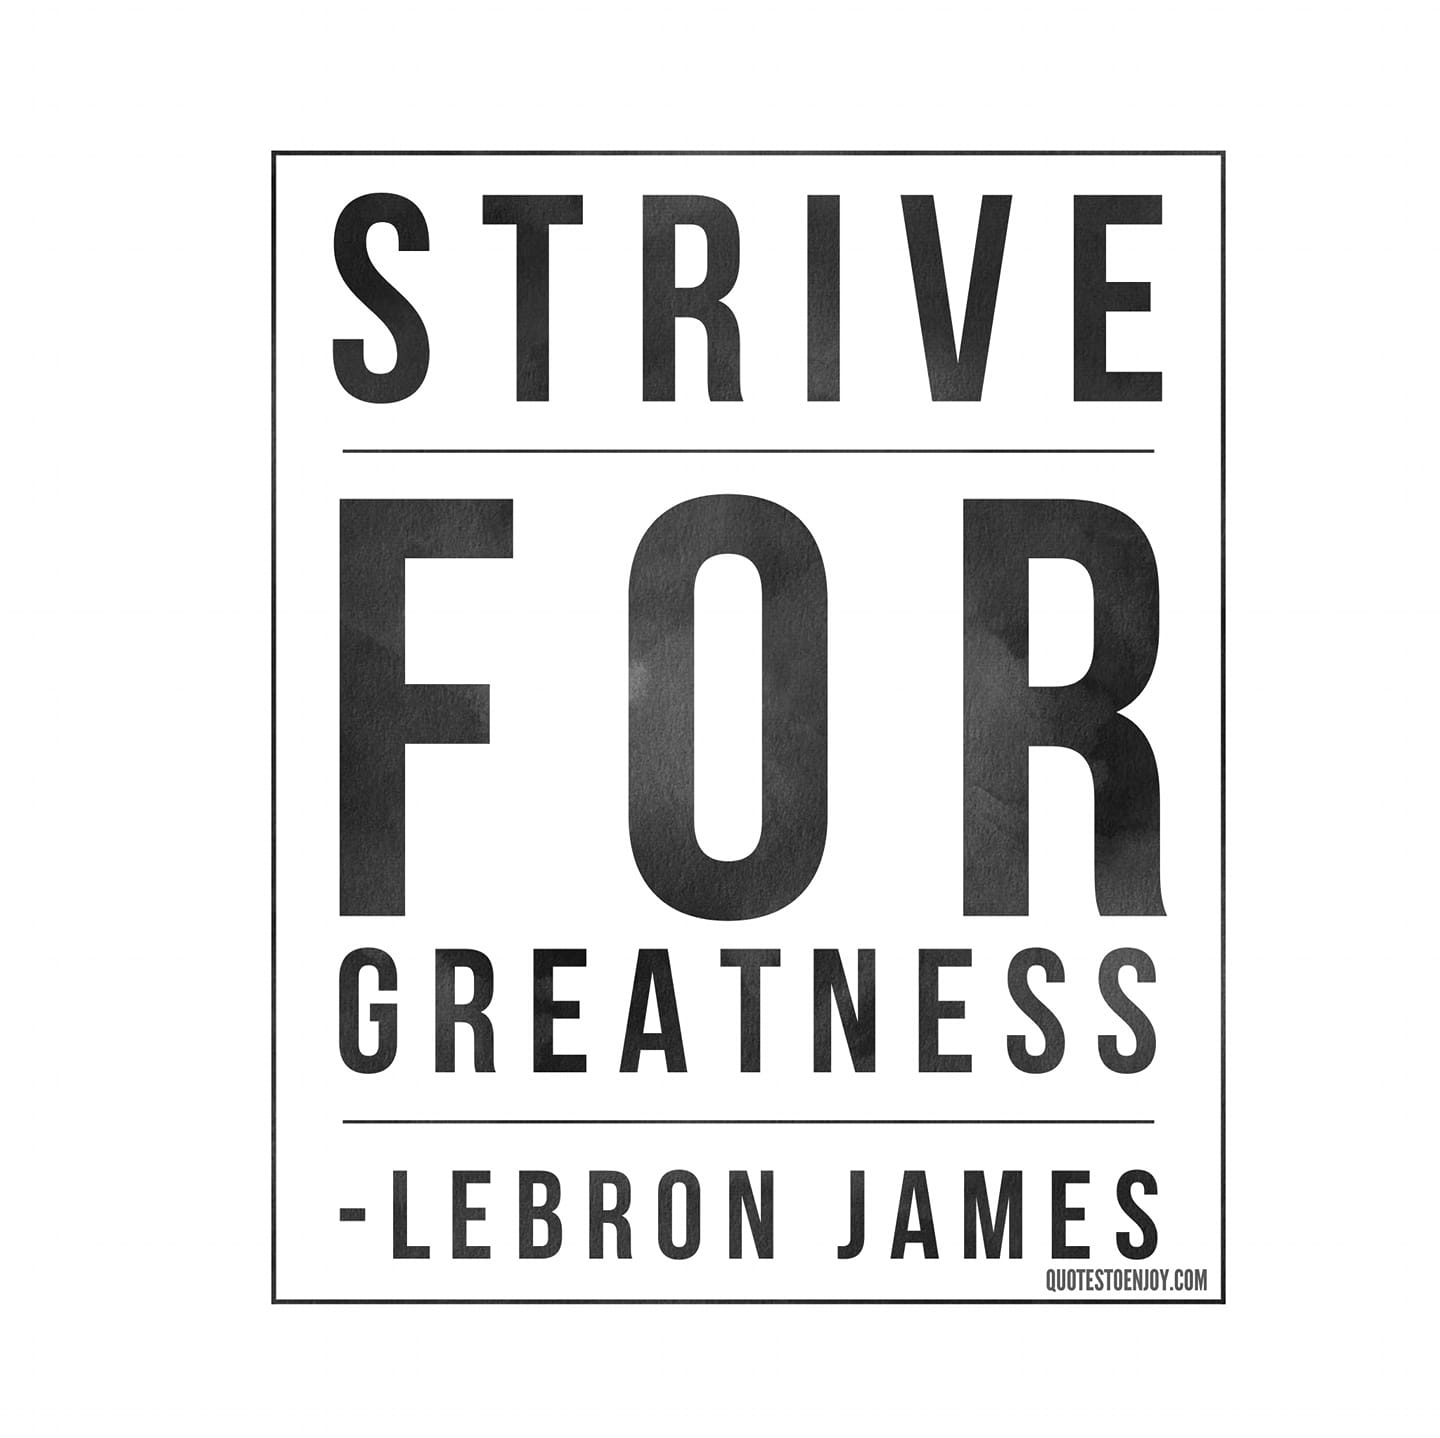 Strive for greatness LeBron James